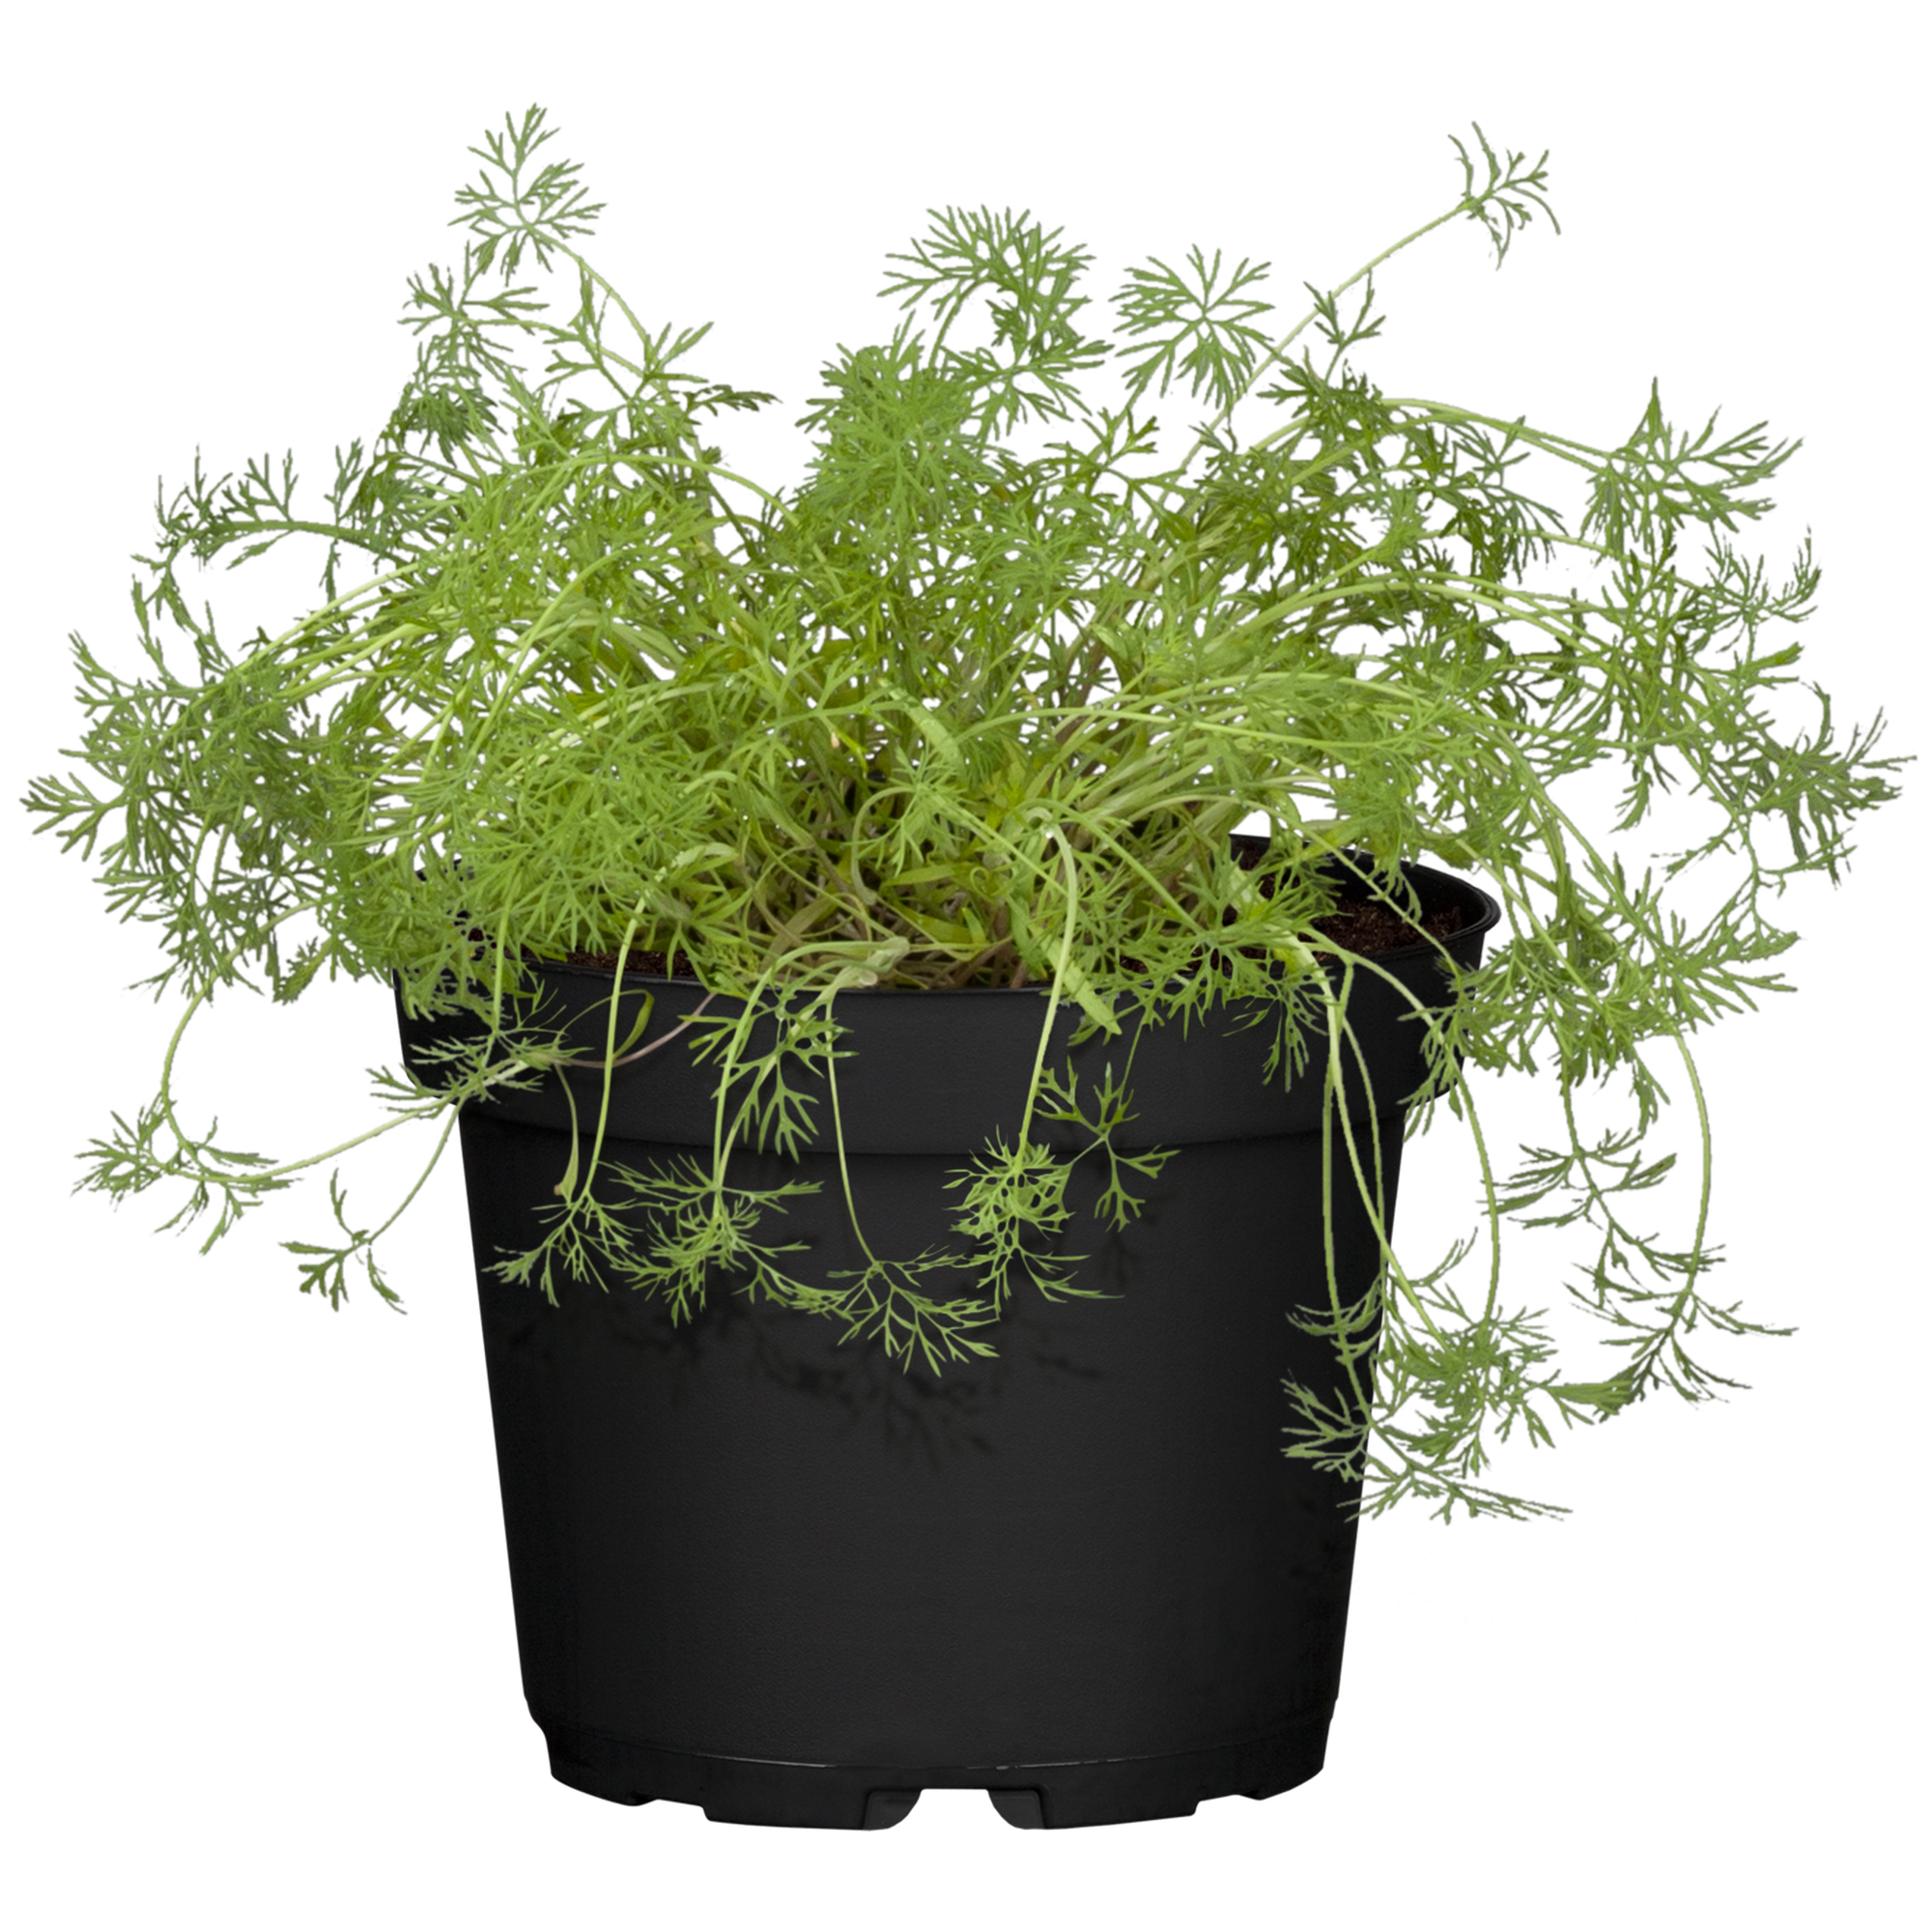 Naturtalent by toom® Bio-Dill 12 cm Topf + product picture